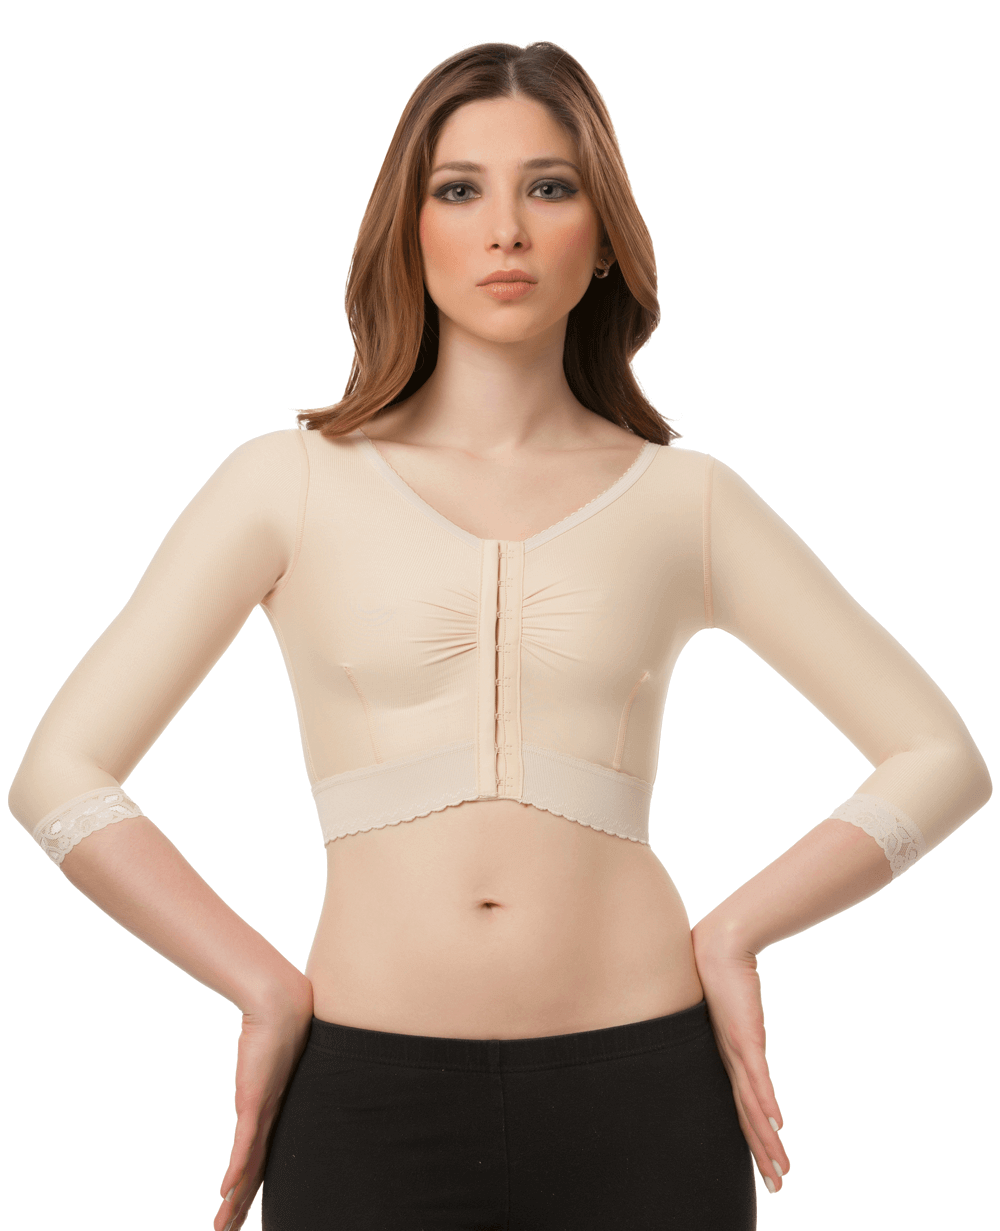  Isavela 2nd Stage High Waist Abdominal Ankle Length Compression  Girdle (GR08) (XS, Black) : Clothing, Shoes & Jewelry